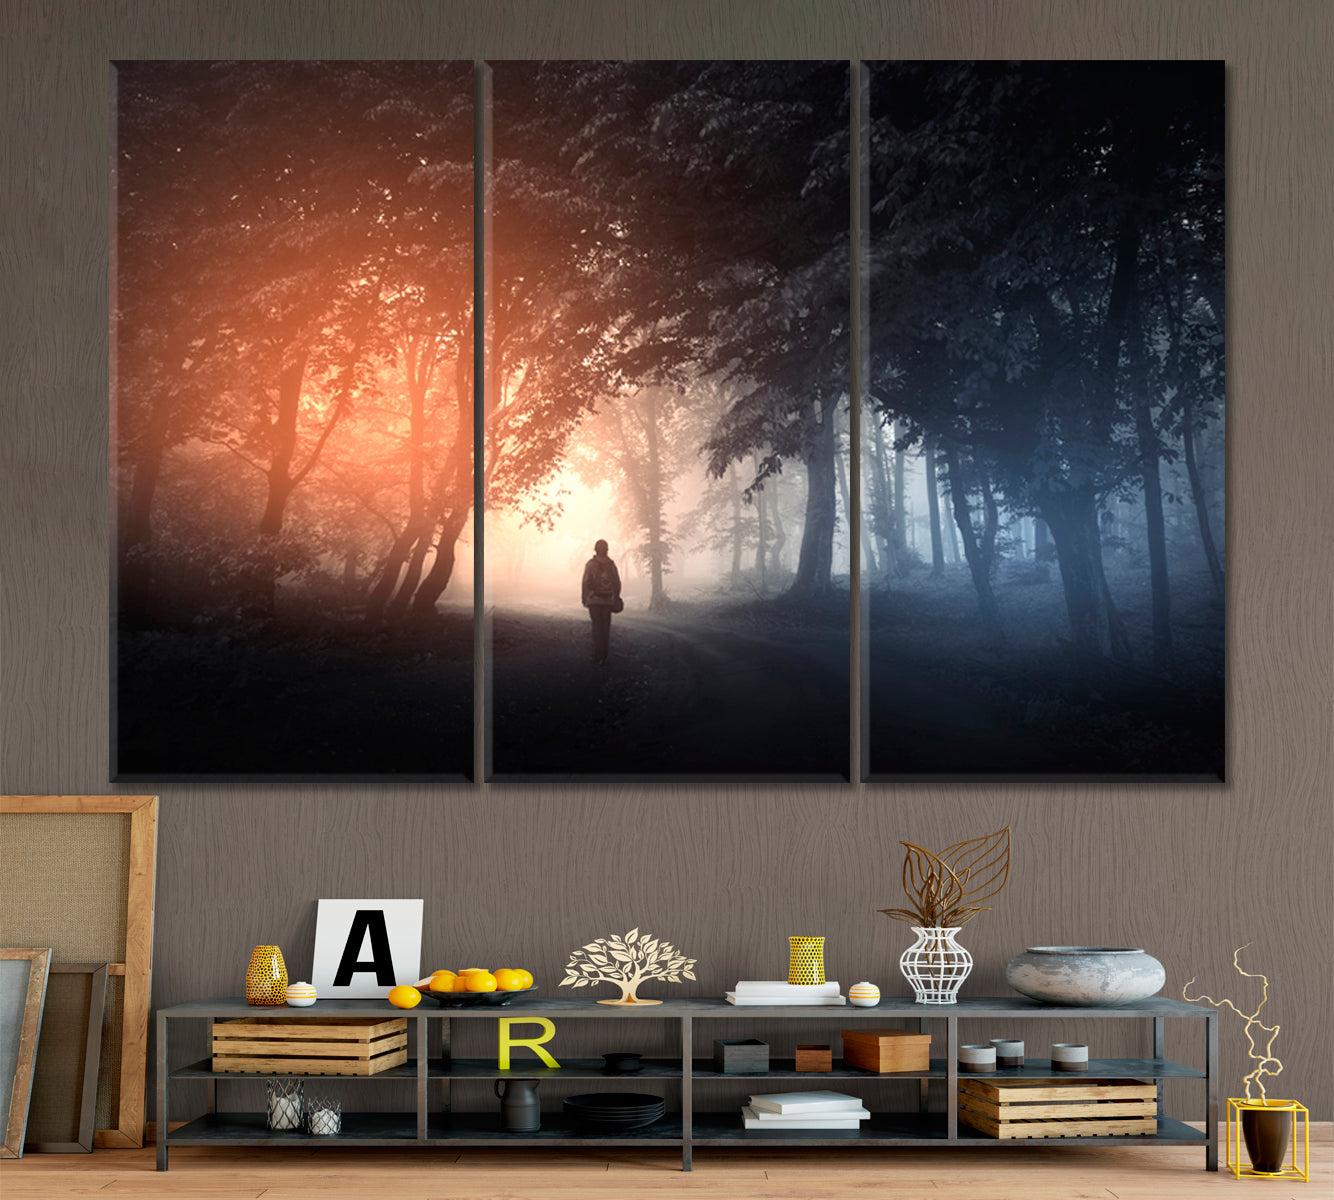 PATH TO THE LIGHT Mysterious Landscape Fantastic Surreal Misty Forest Trees Man Walking on the Path Scenery Landscape Fine Art Print Artesty   